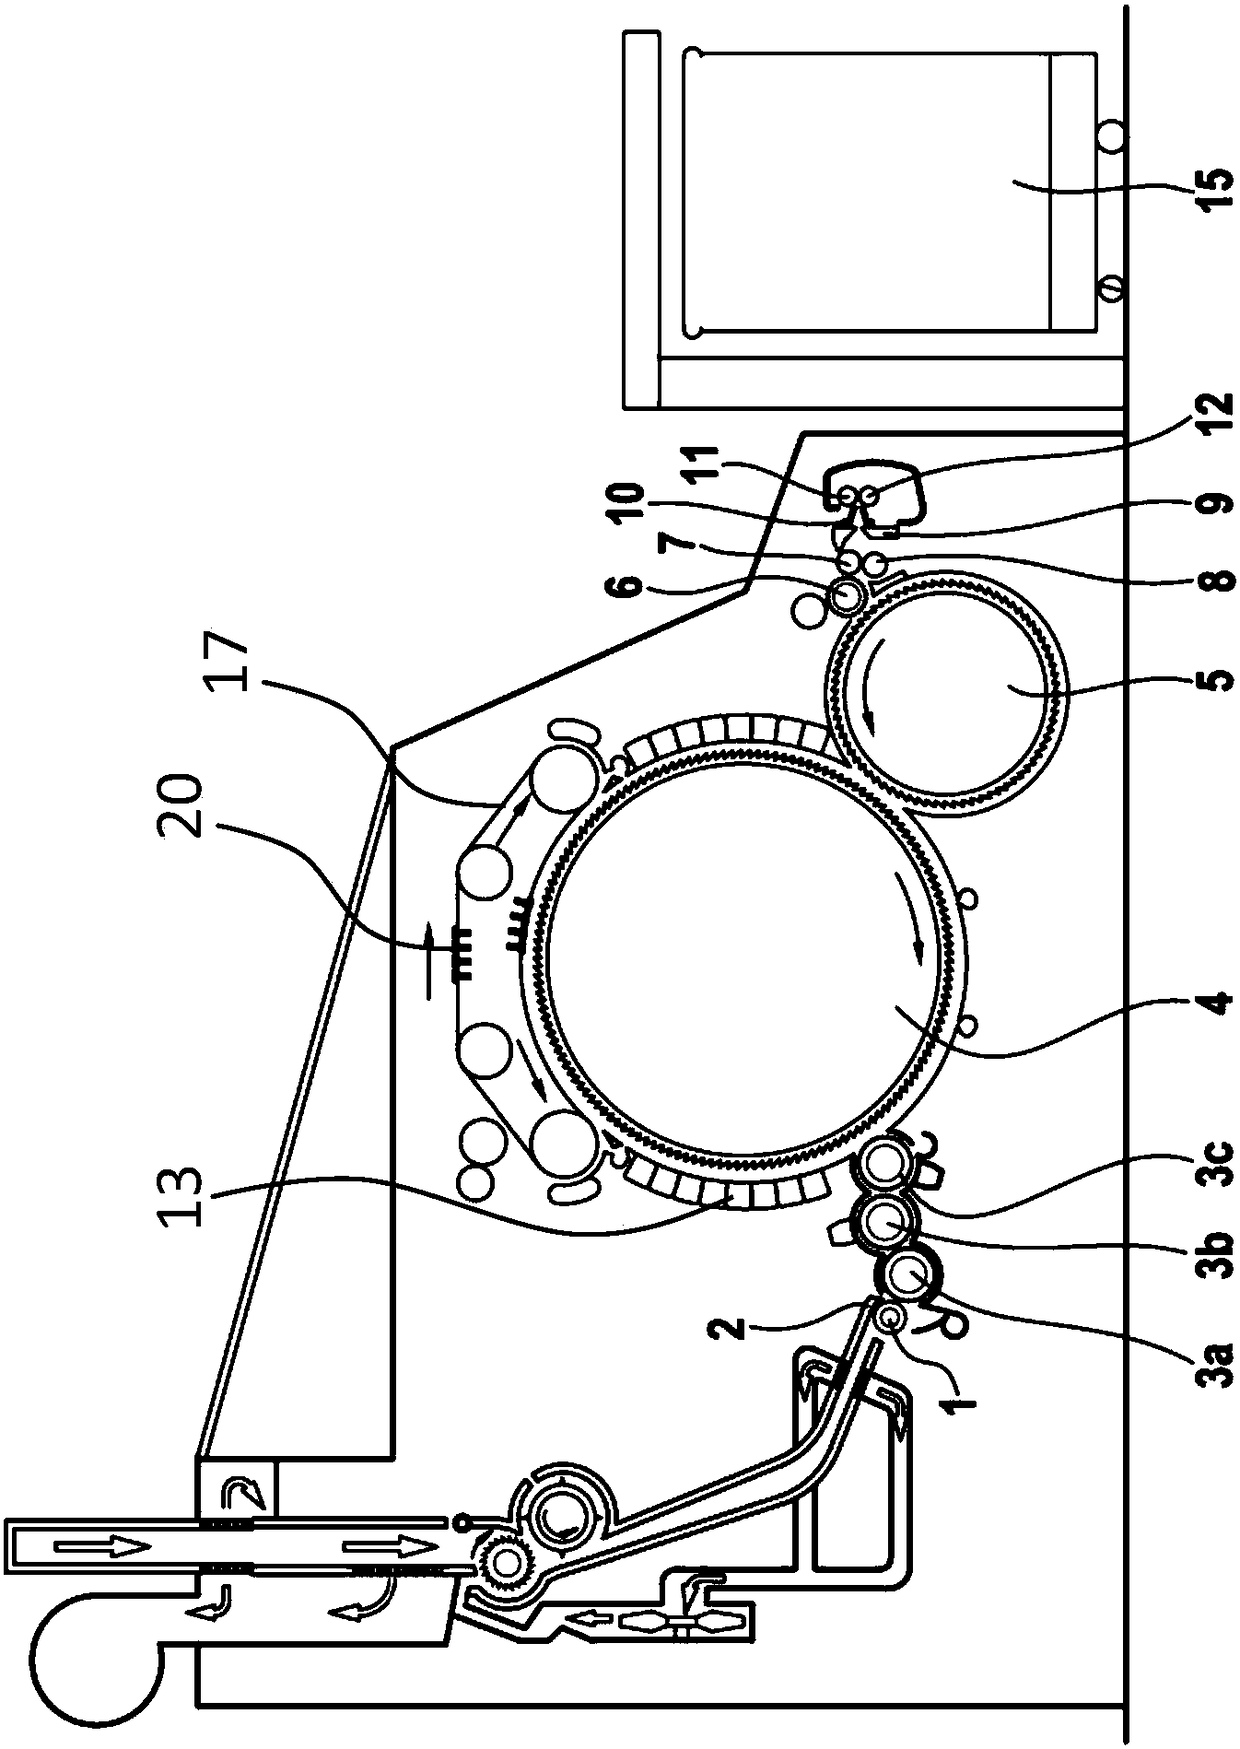 Carding machine with a device for adjustment of the carding gap